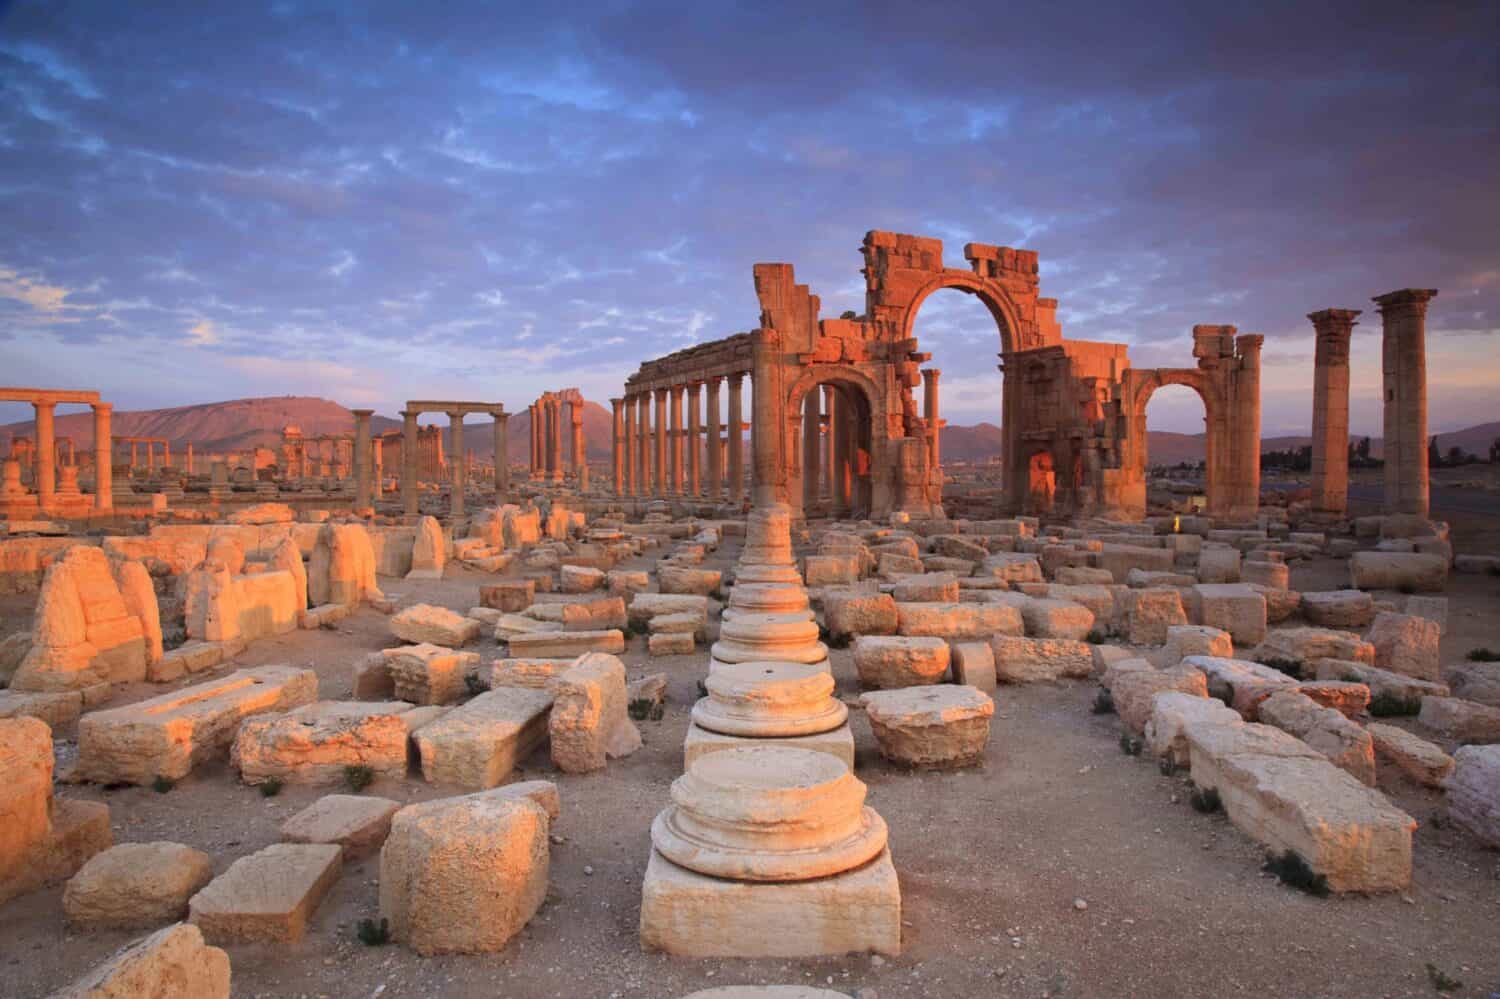 The Bel Temple in Palmyra, Syria, is an ancient architectural marvel. Majestic columns and intricate carvings adorn its facade, reflecting a blend of Roman and Semitic influences. The temple, dedicate